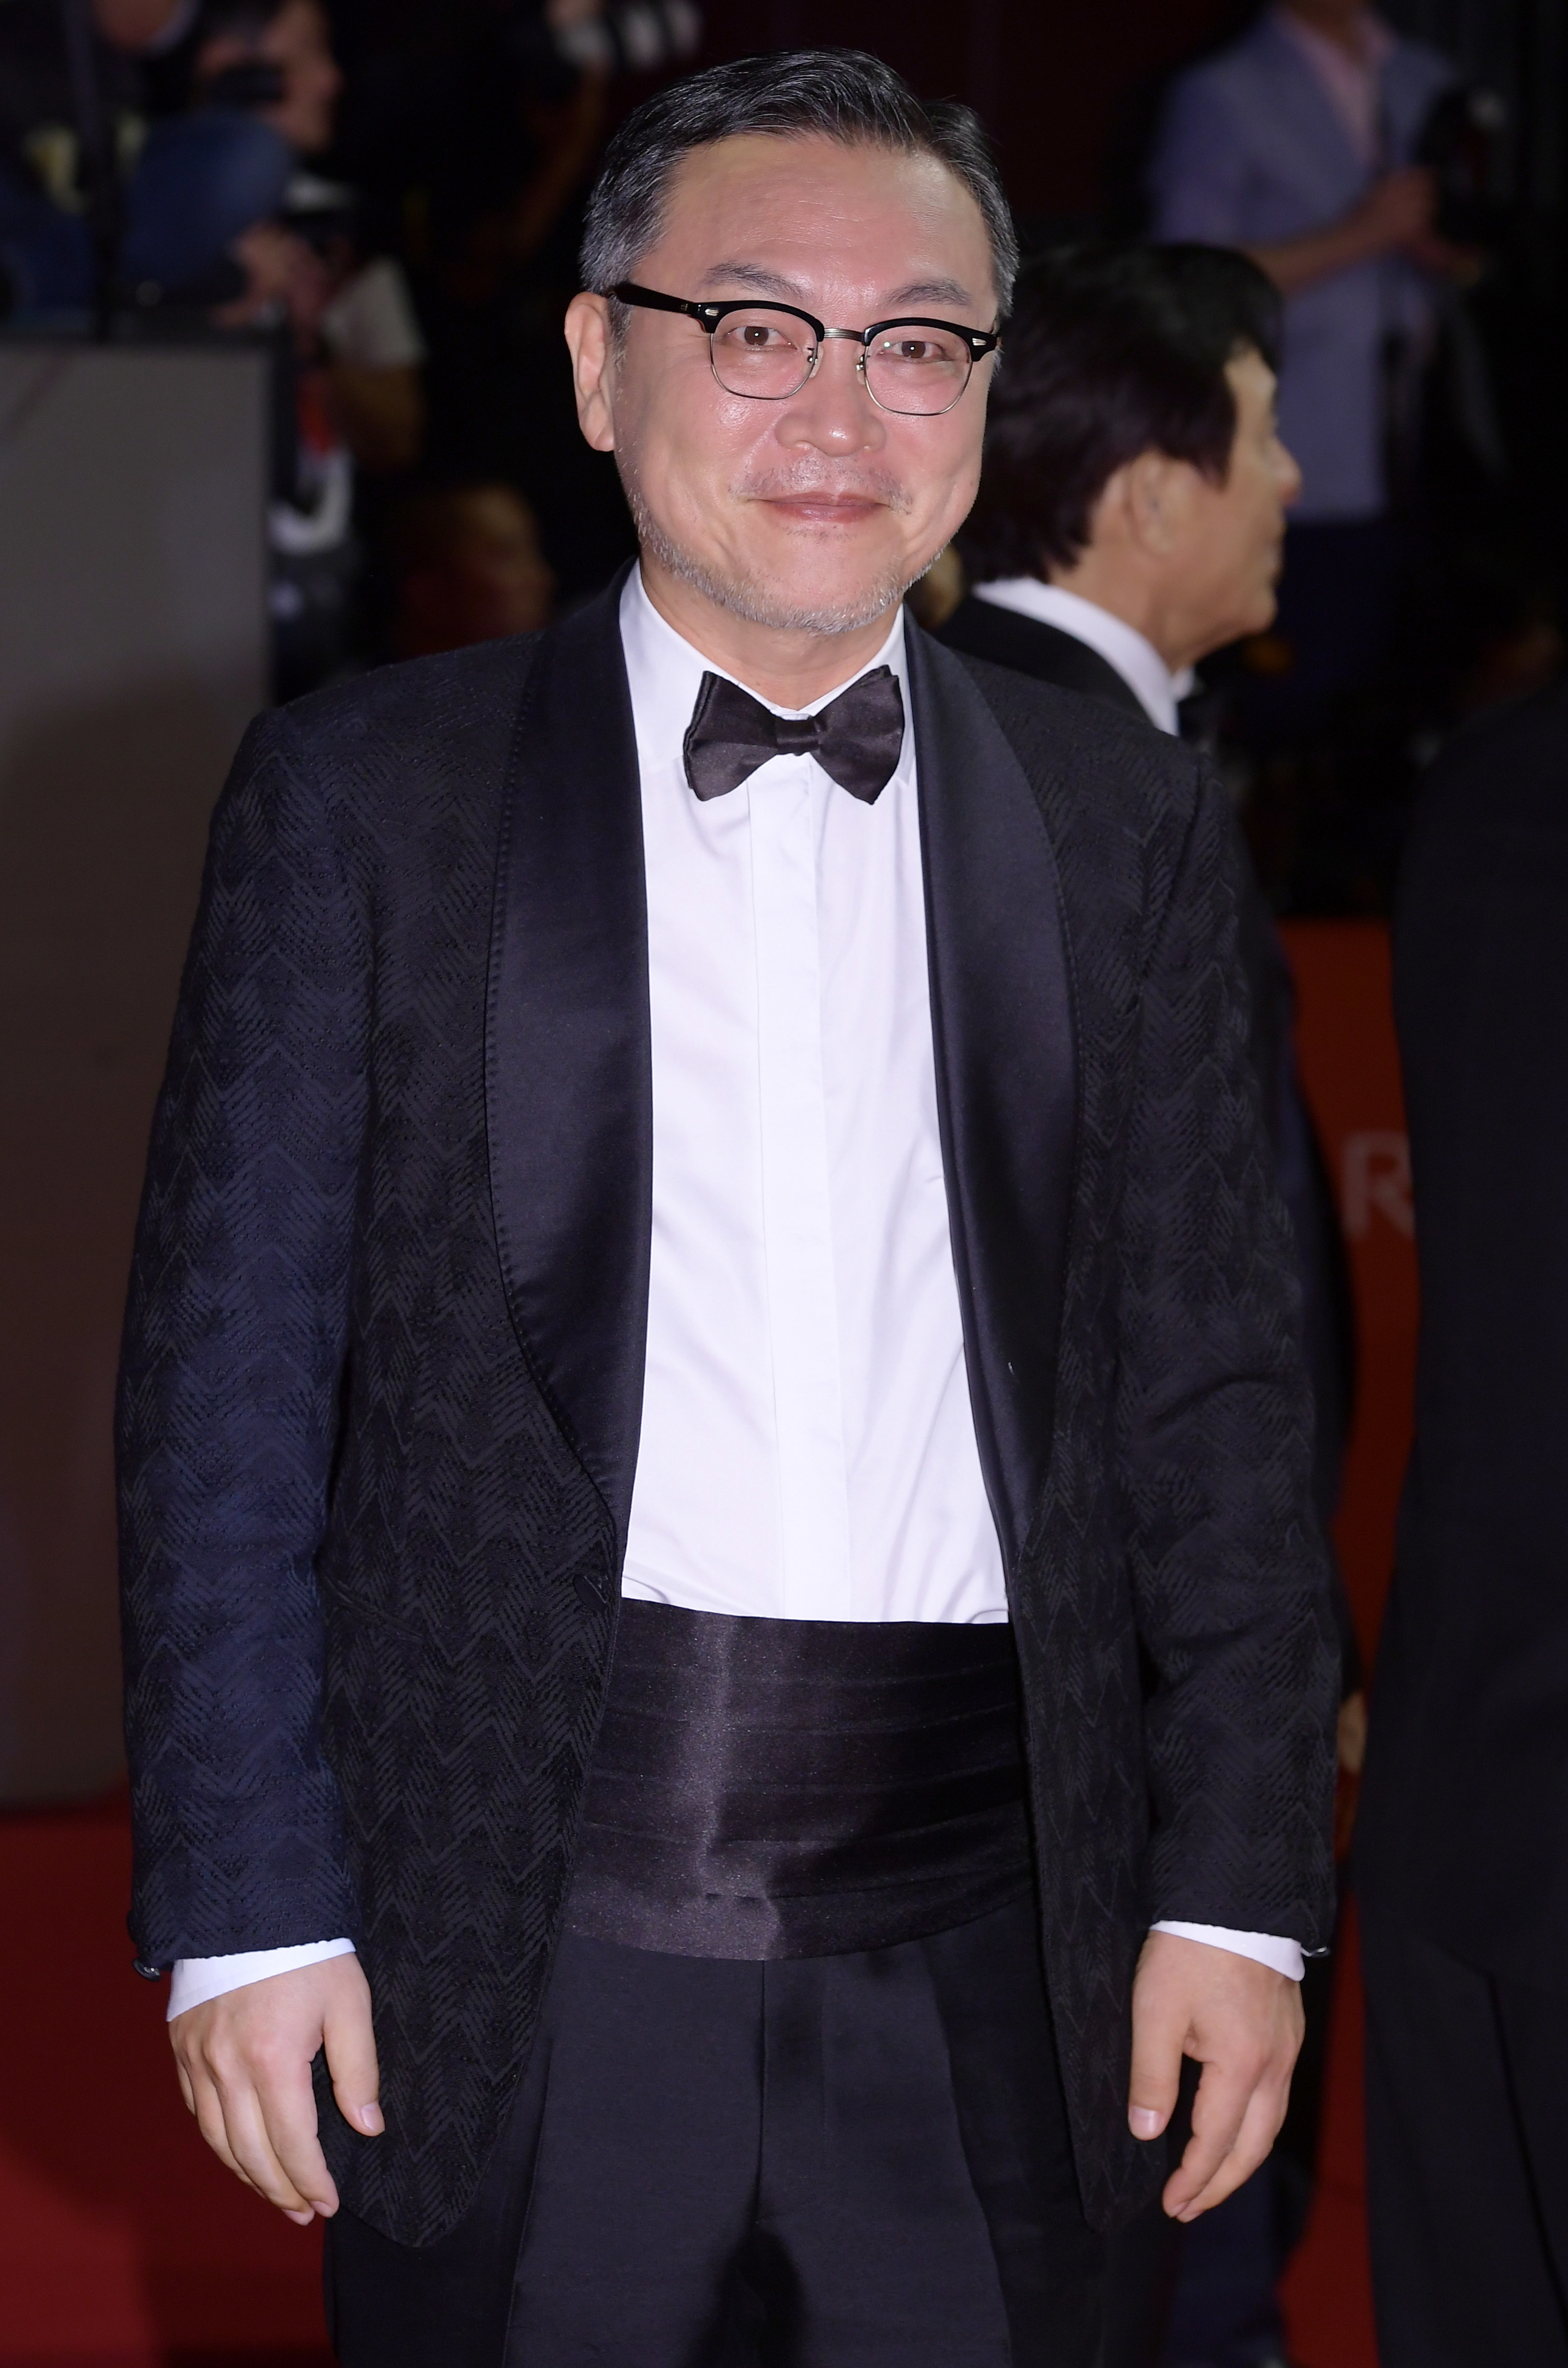 Kim Eui-sung at event in a suit